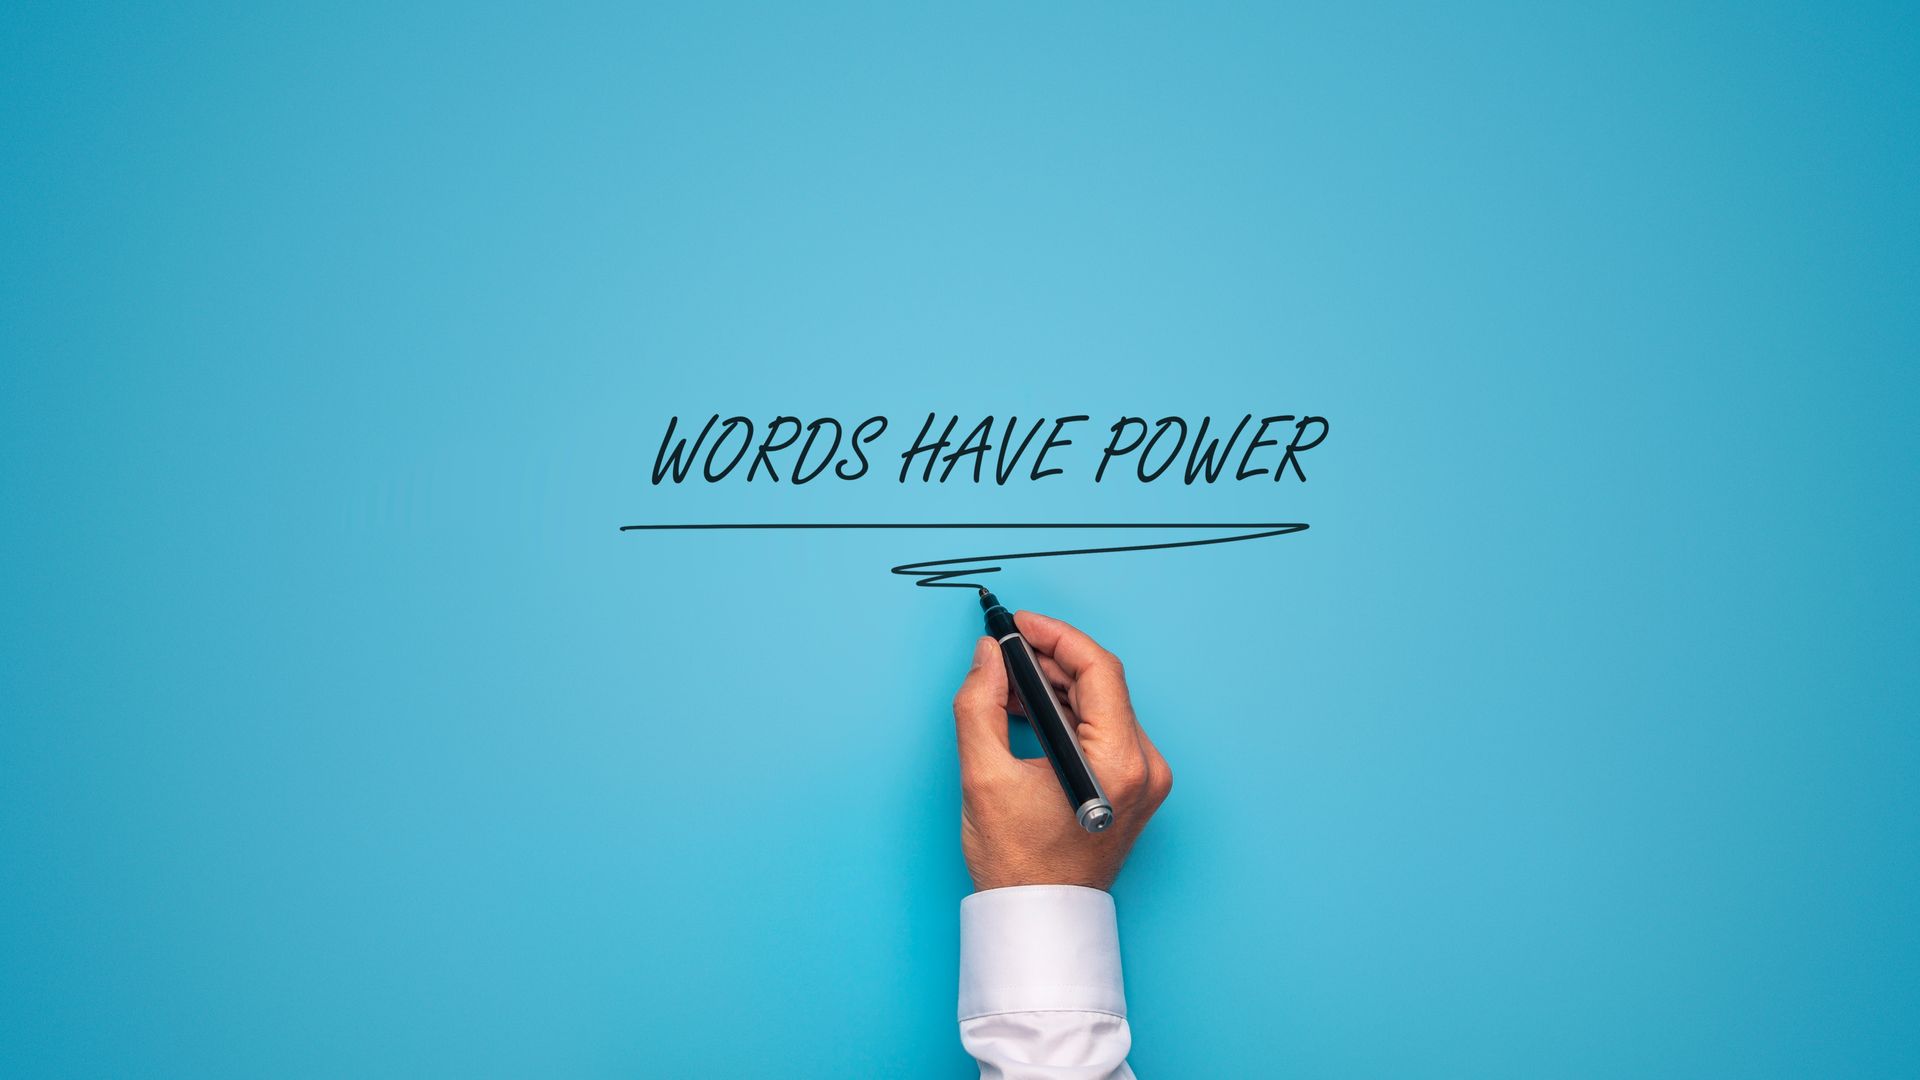 A man scribbles a line underneath 'WORDS HAVE POWER